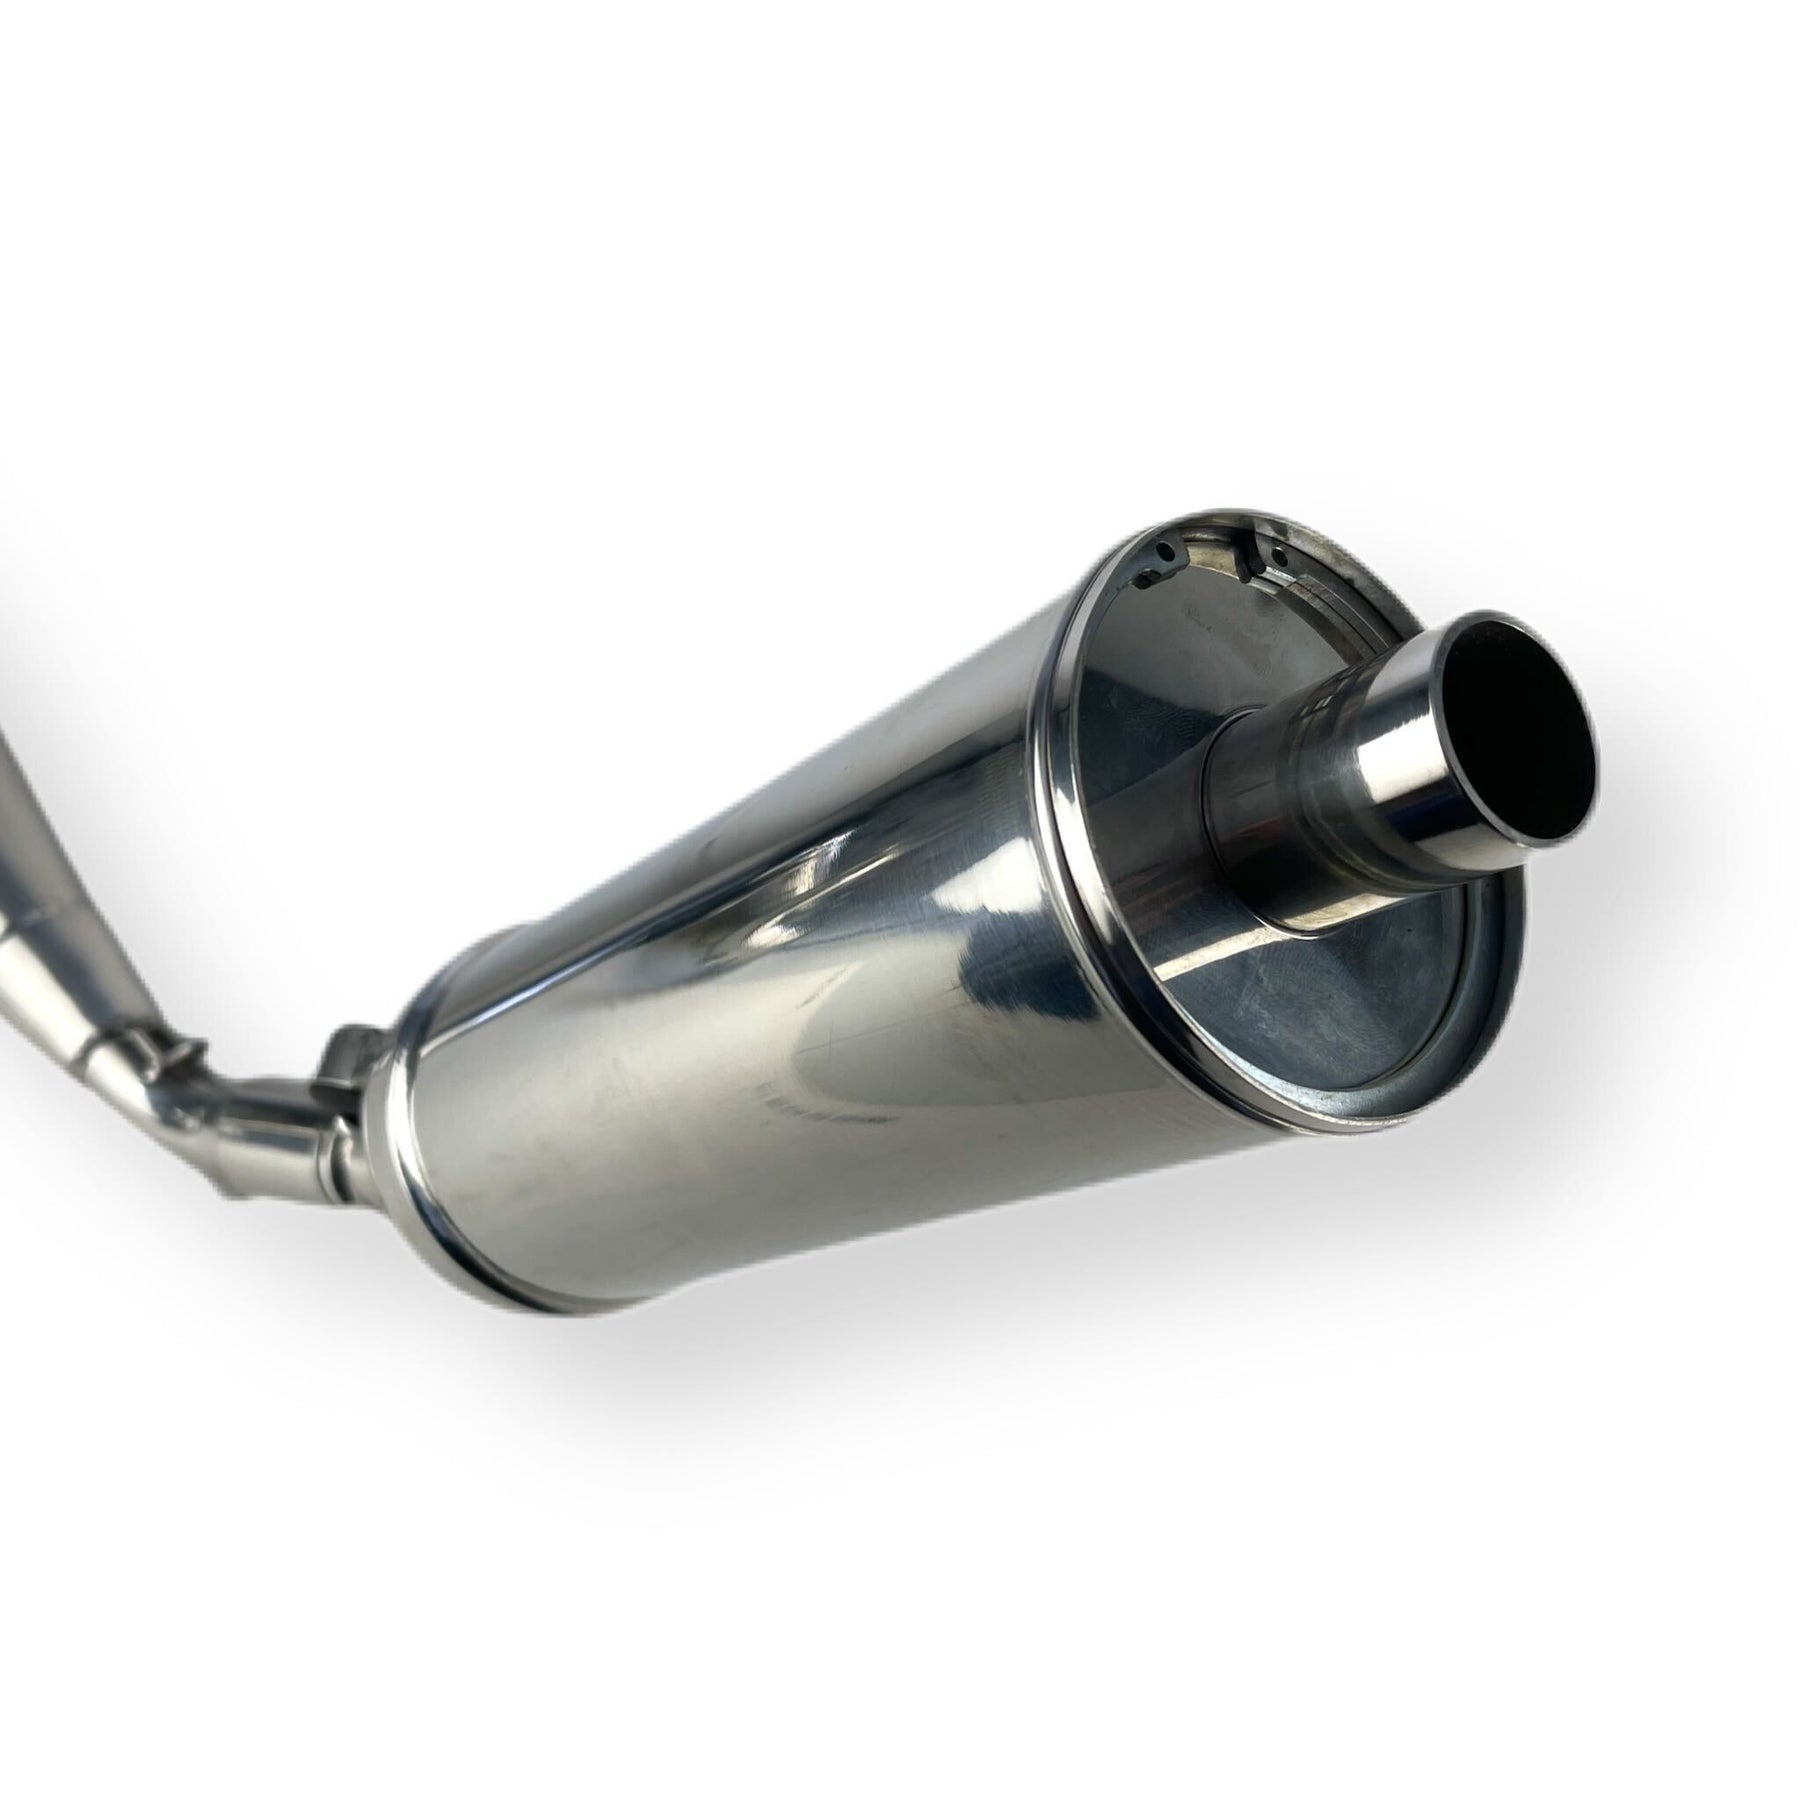 Lambretta S3 Li GP SX TV Taffy Style Expansion Exhaust - Polished Stainless Steel